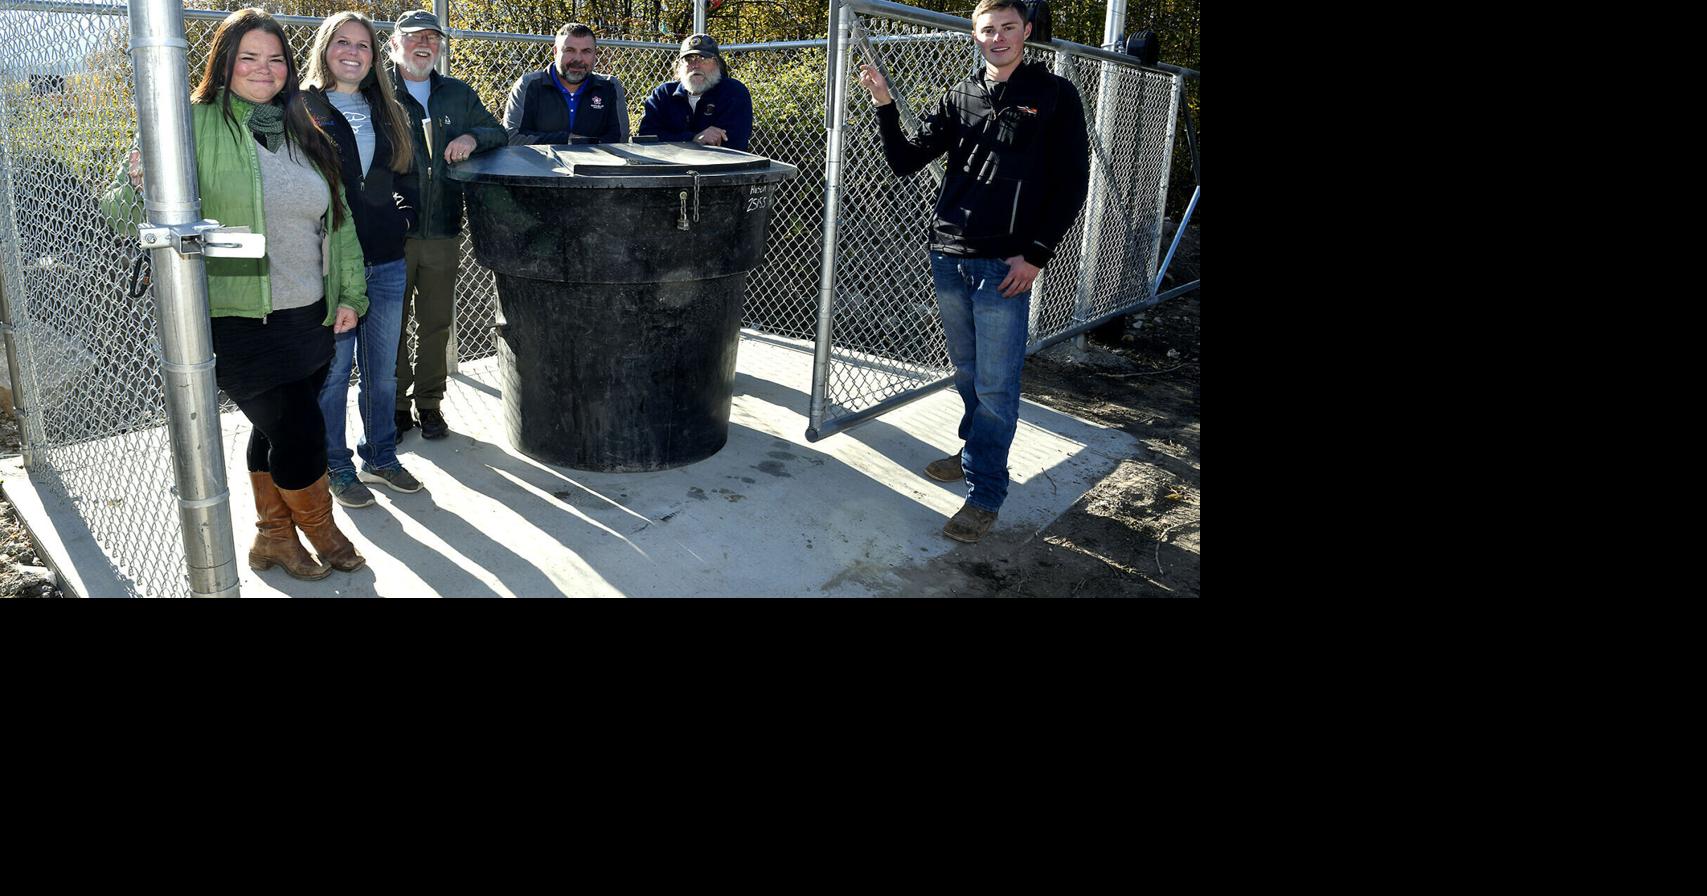 Metal garbage cans are the ultimate bear proof trash enclosures